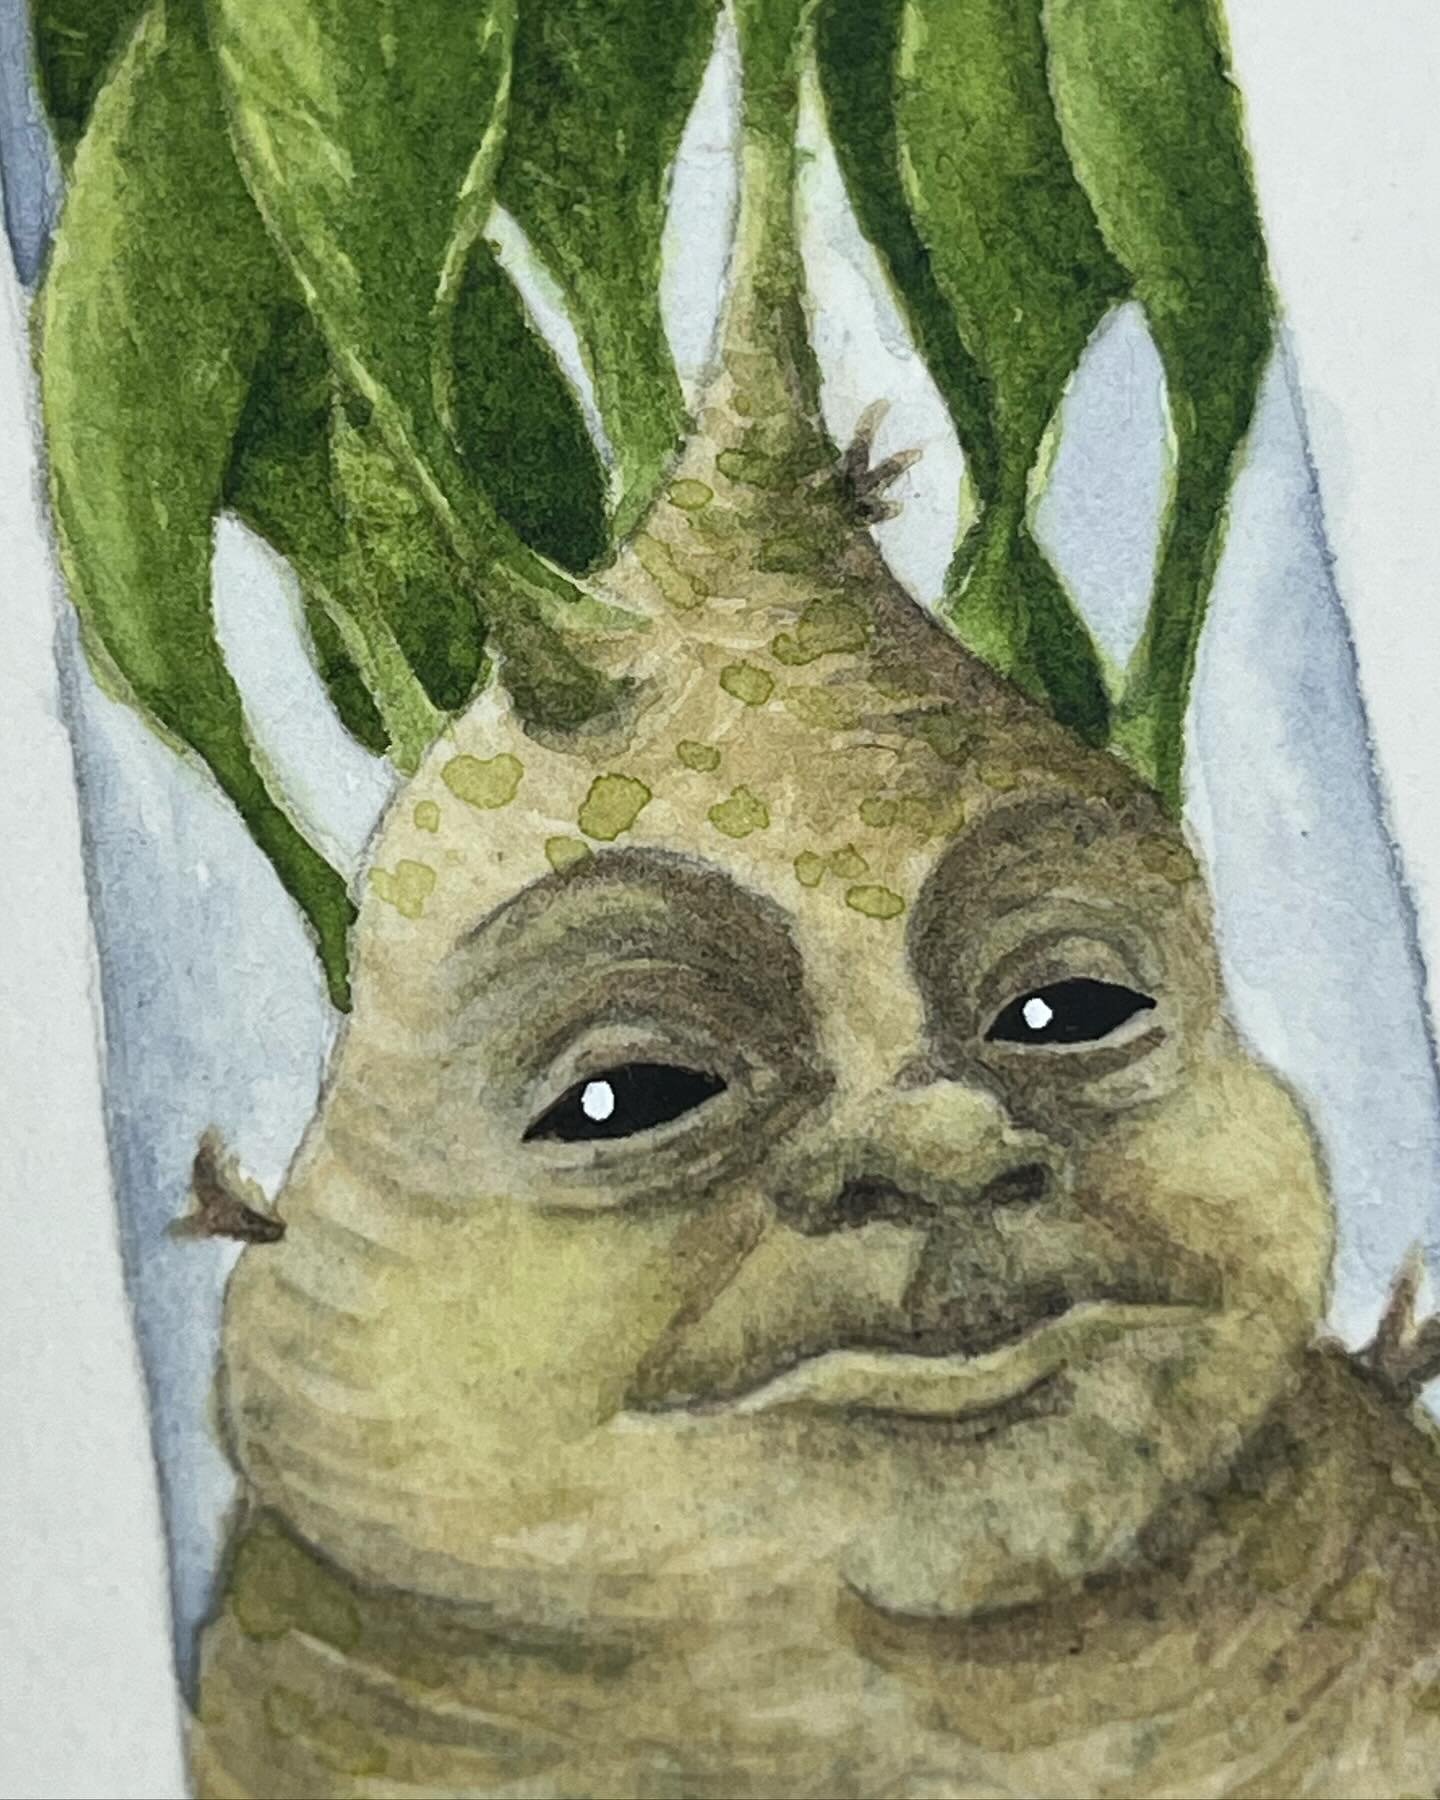 ✨ Mandrakes are known for their slow, no-fuss approach to life. They will happily spend their entire lives in the same spot just observing the world go by. In the wild this often leads to mass extinction as root loving animals discover they have a ta